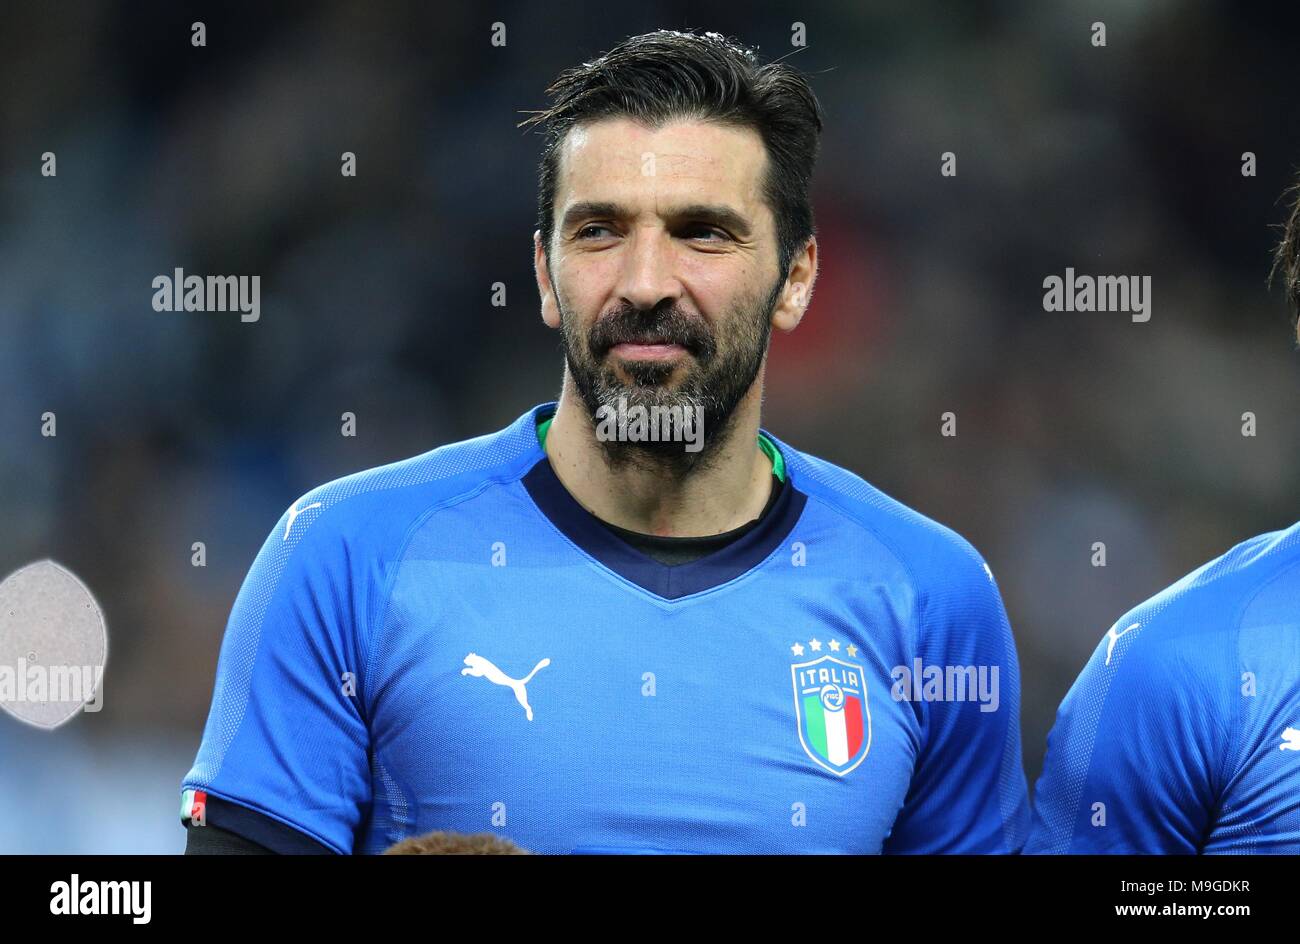 GIANLUIGI BUFFON ITALY and JUVENTUS FC ARGENTINA V ITALY, INTERNATIONAL FRIENDLY ETIHAD STADIUM, MANCHESTER, ENGLAND 23 March 2018 GBB7078 STRICTLY EDITORIAL USE ONLY